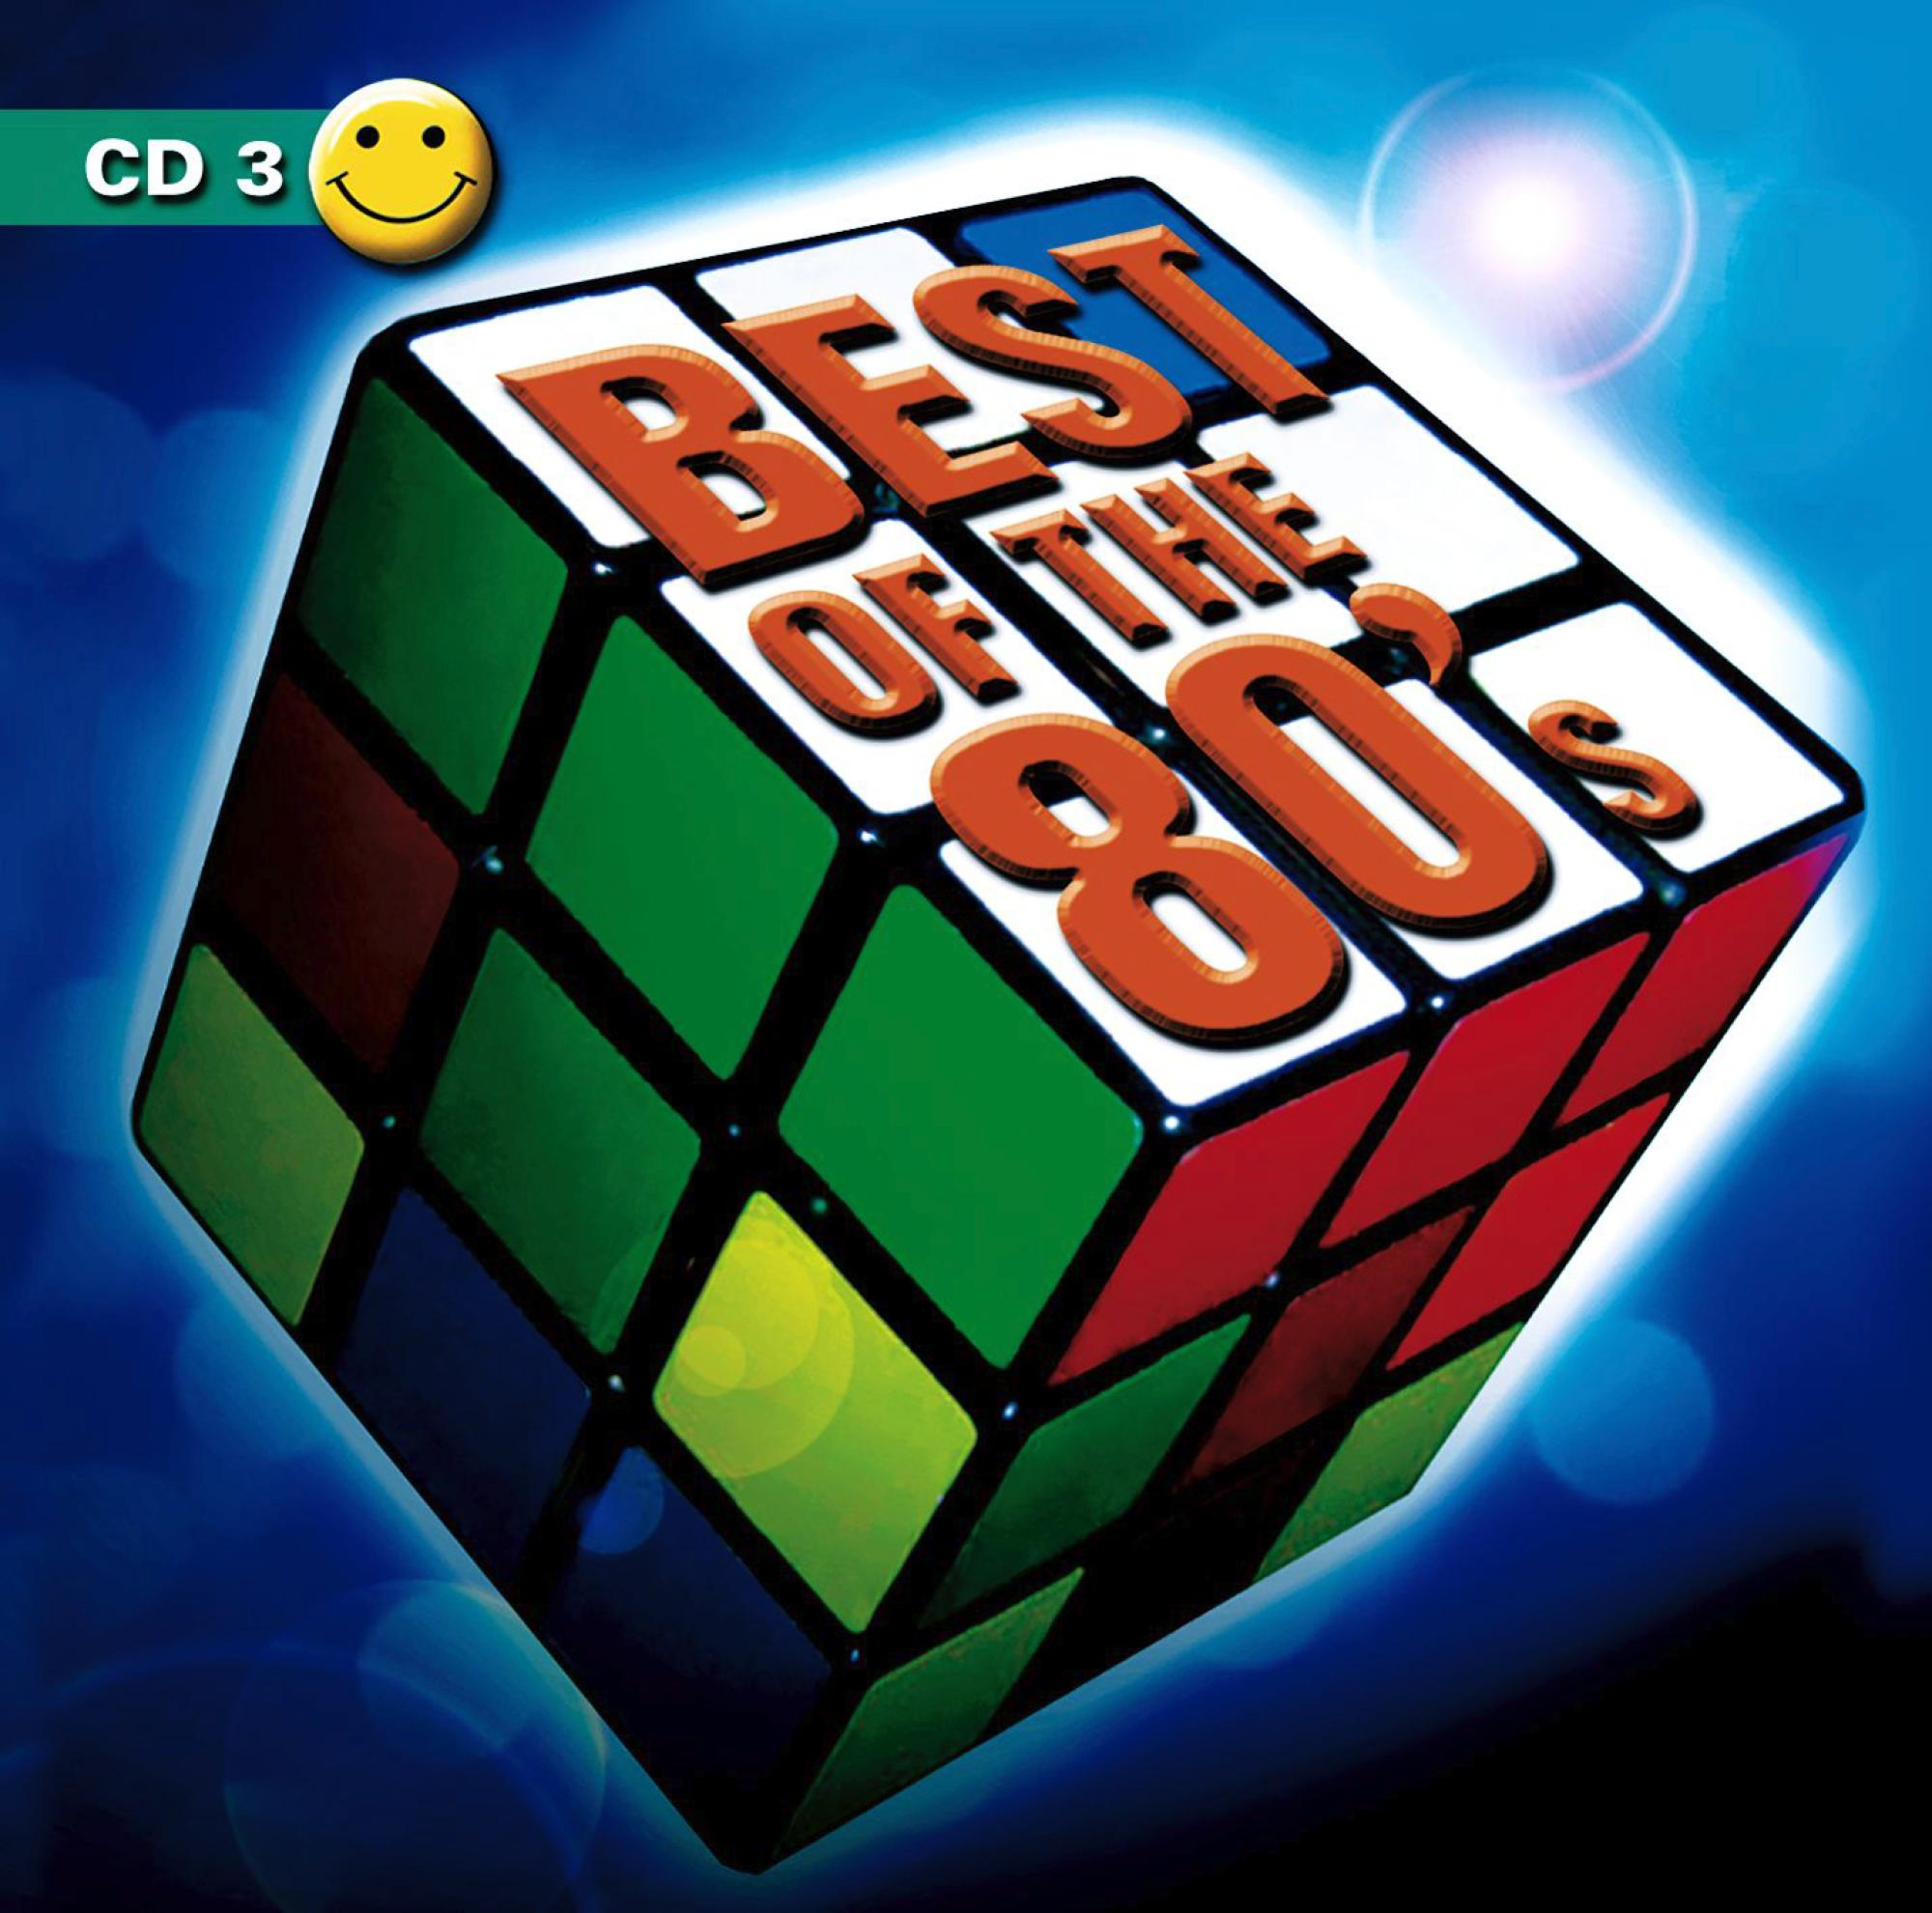 Best (CD) 80s VARIOUS Of - The -